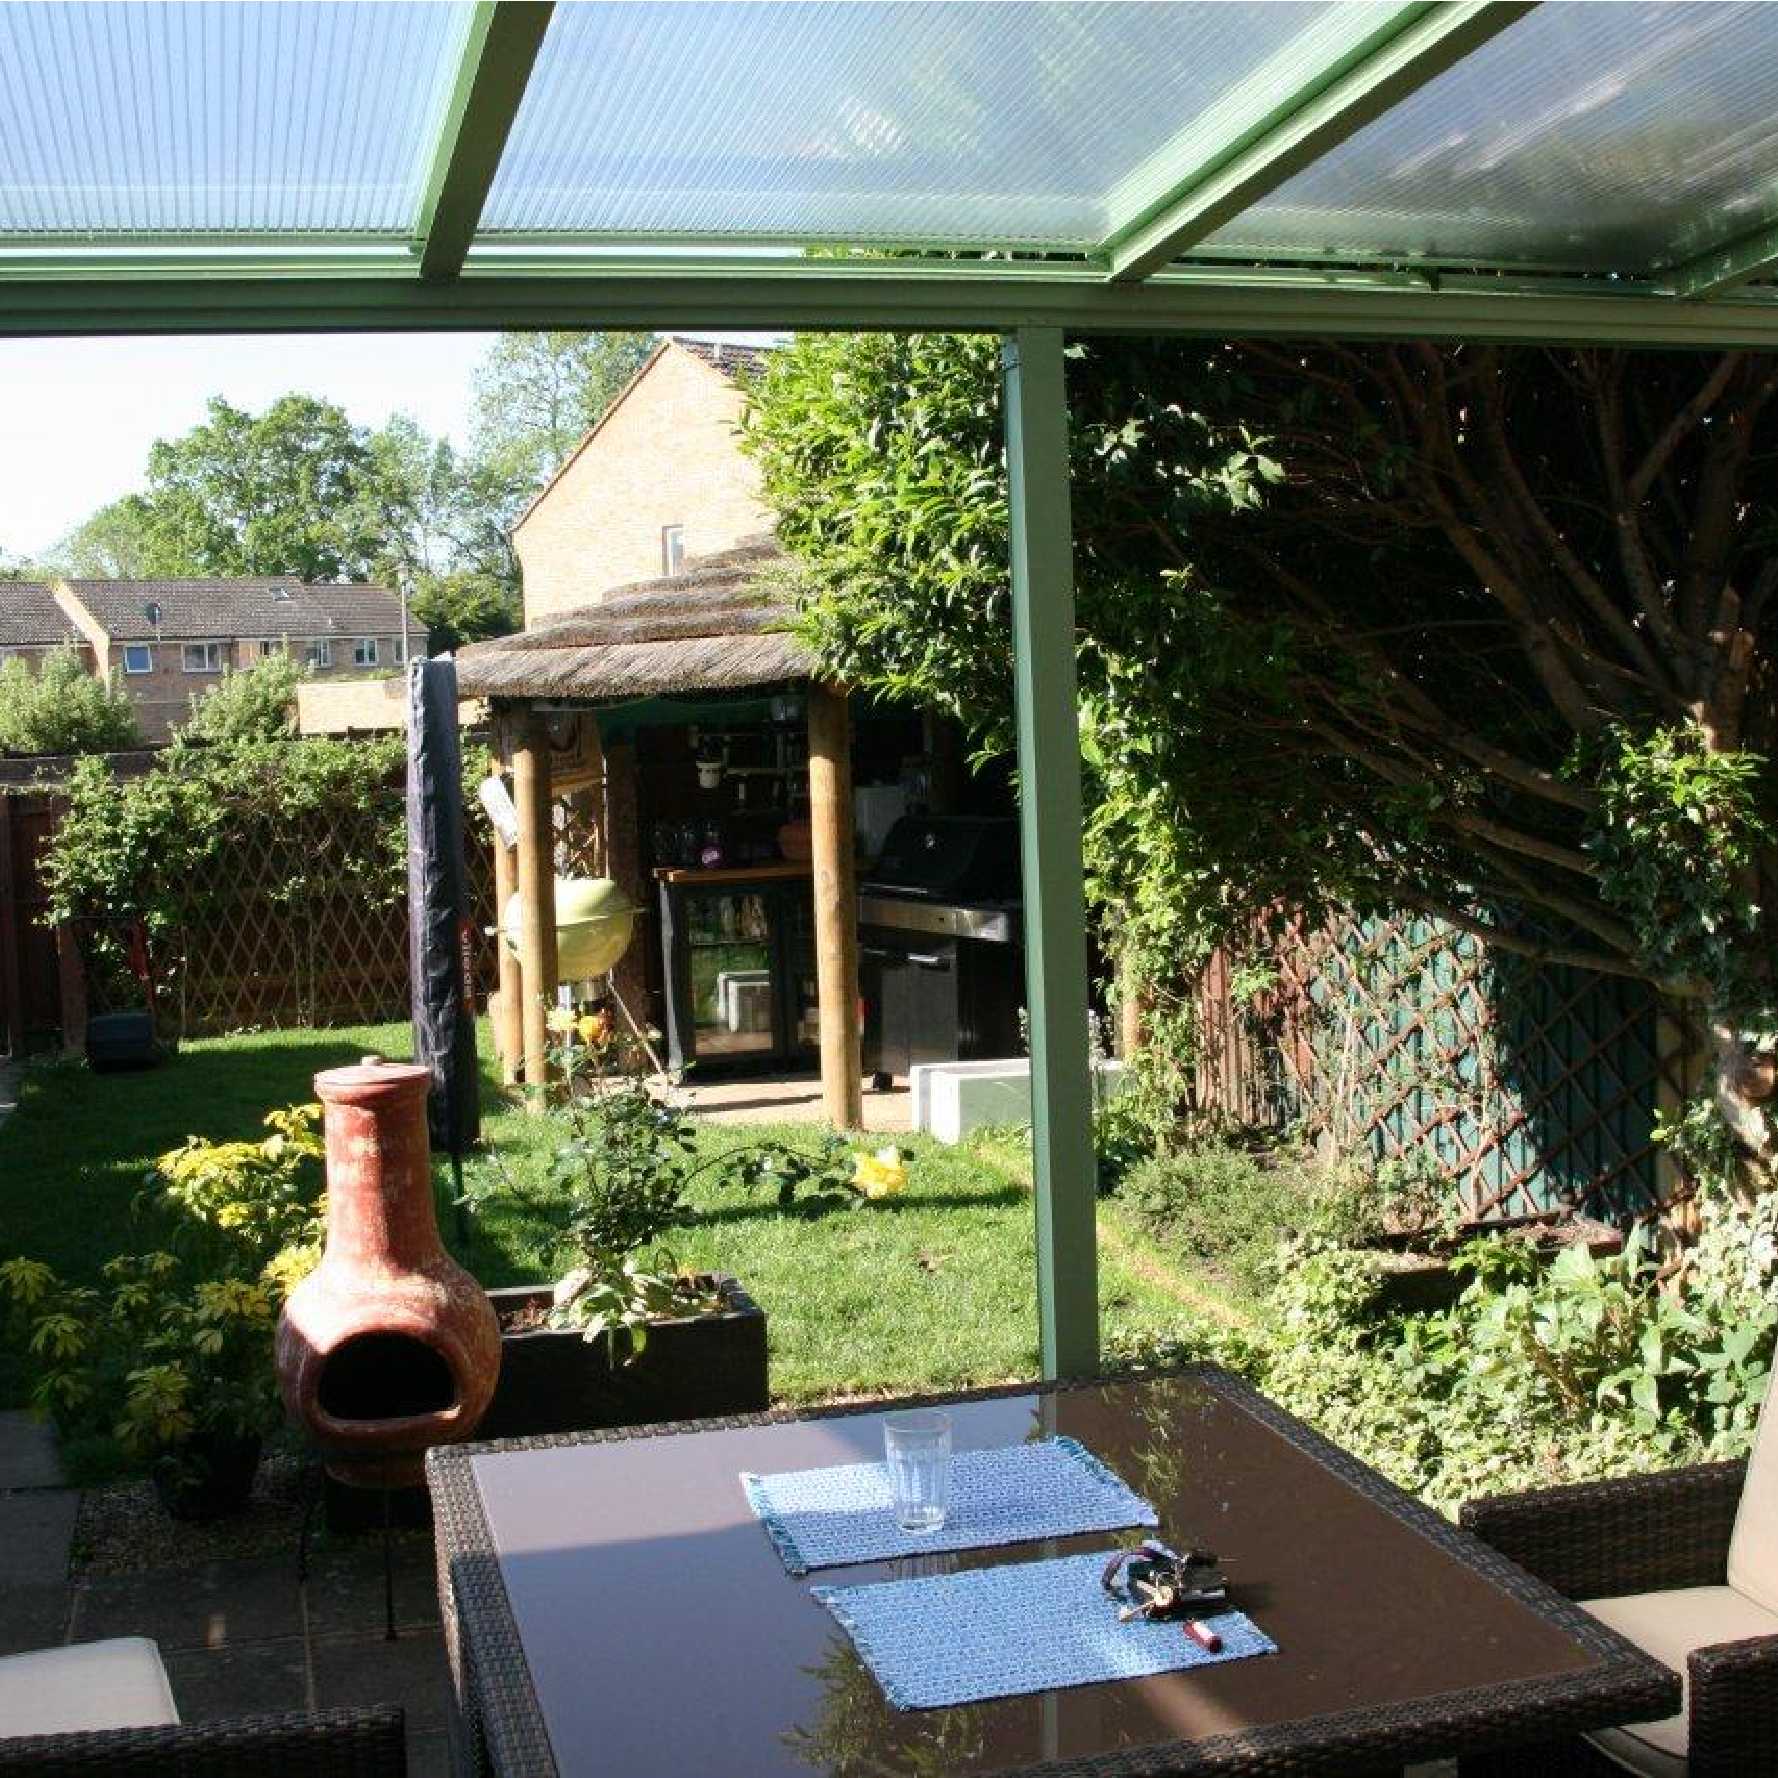 Affordable Omega Smart Lean-To Canopy, White with 16mm Polycarbonate Glazing - 12.0m (W) x 4.0m (P), (5) Supporting Posts